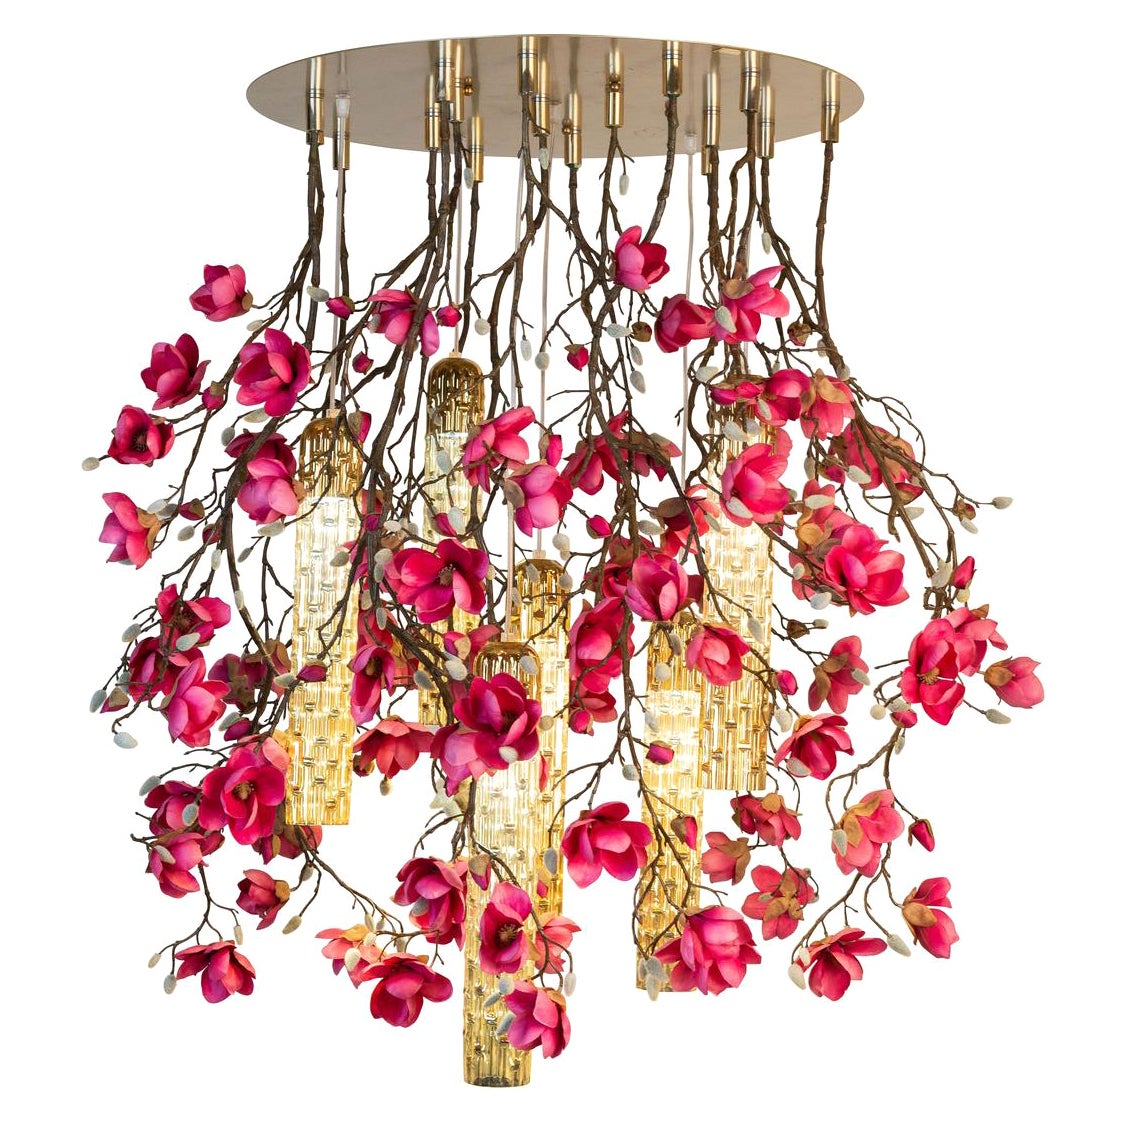 Flower Power Magnolia Fuchsia & Gold Pipes Round Chandelier, Venice, Italy For Sale